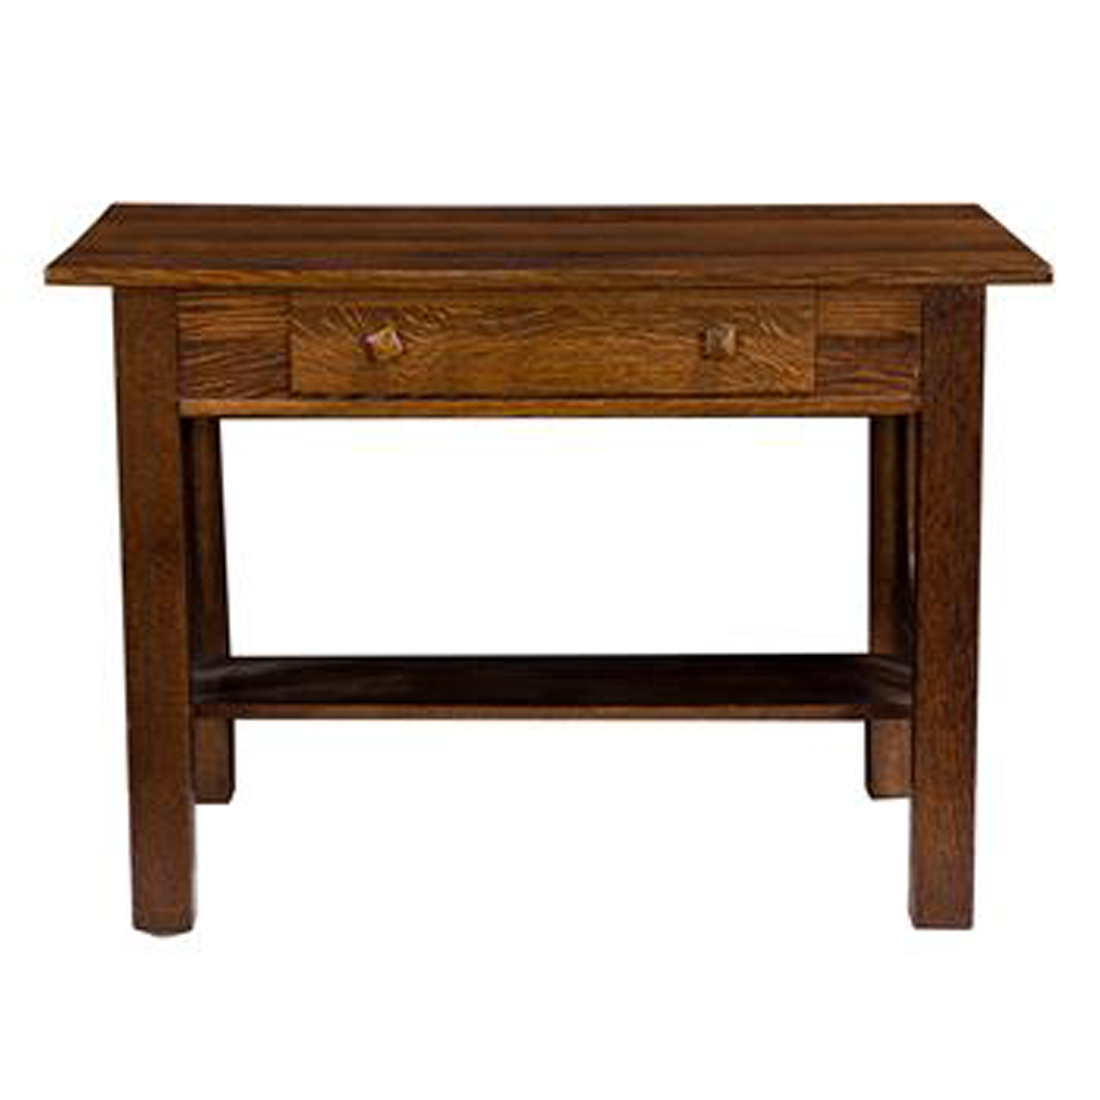 AN ARTS AND CRAFTS DESK LIKELY GRAND